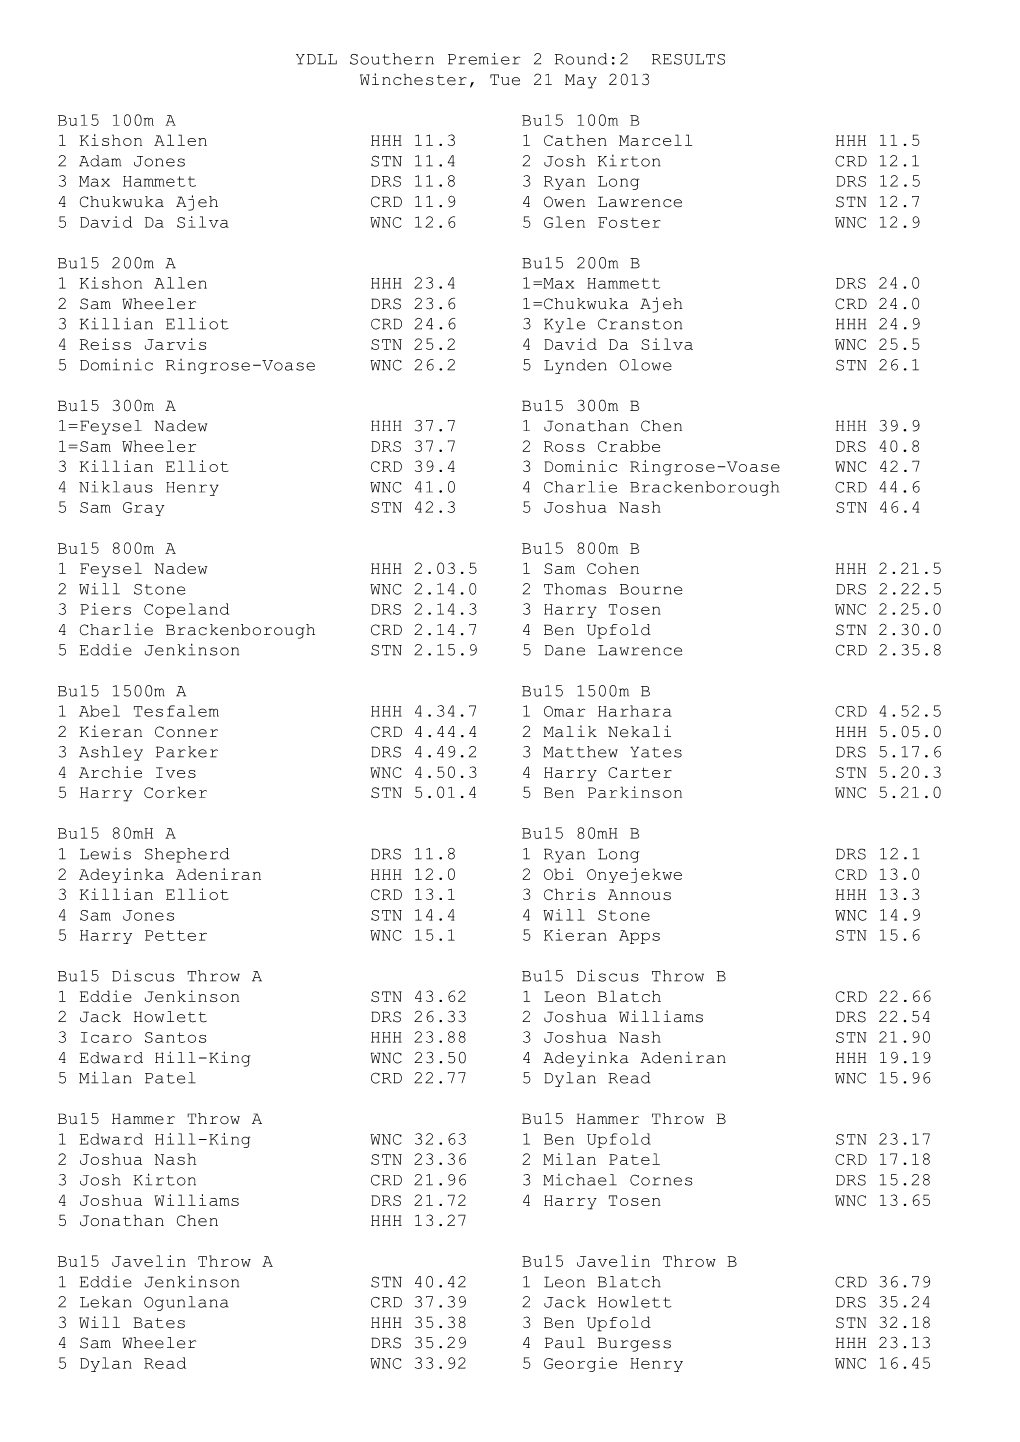 RESULTS Winchester, Tue 21 May 2013